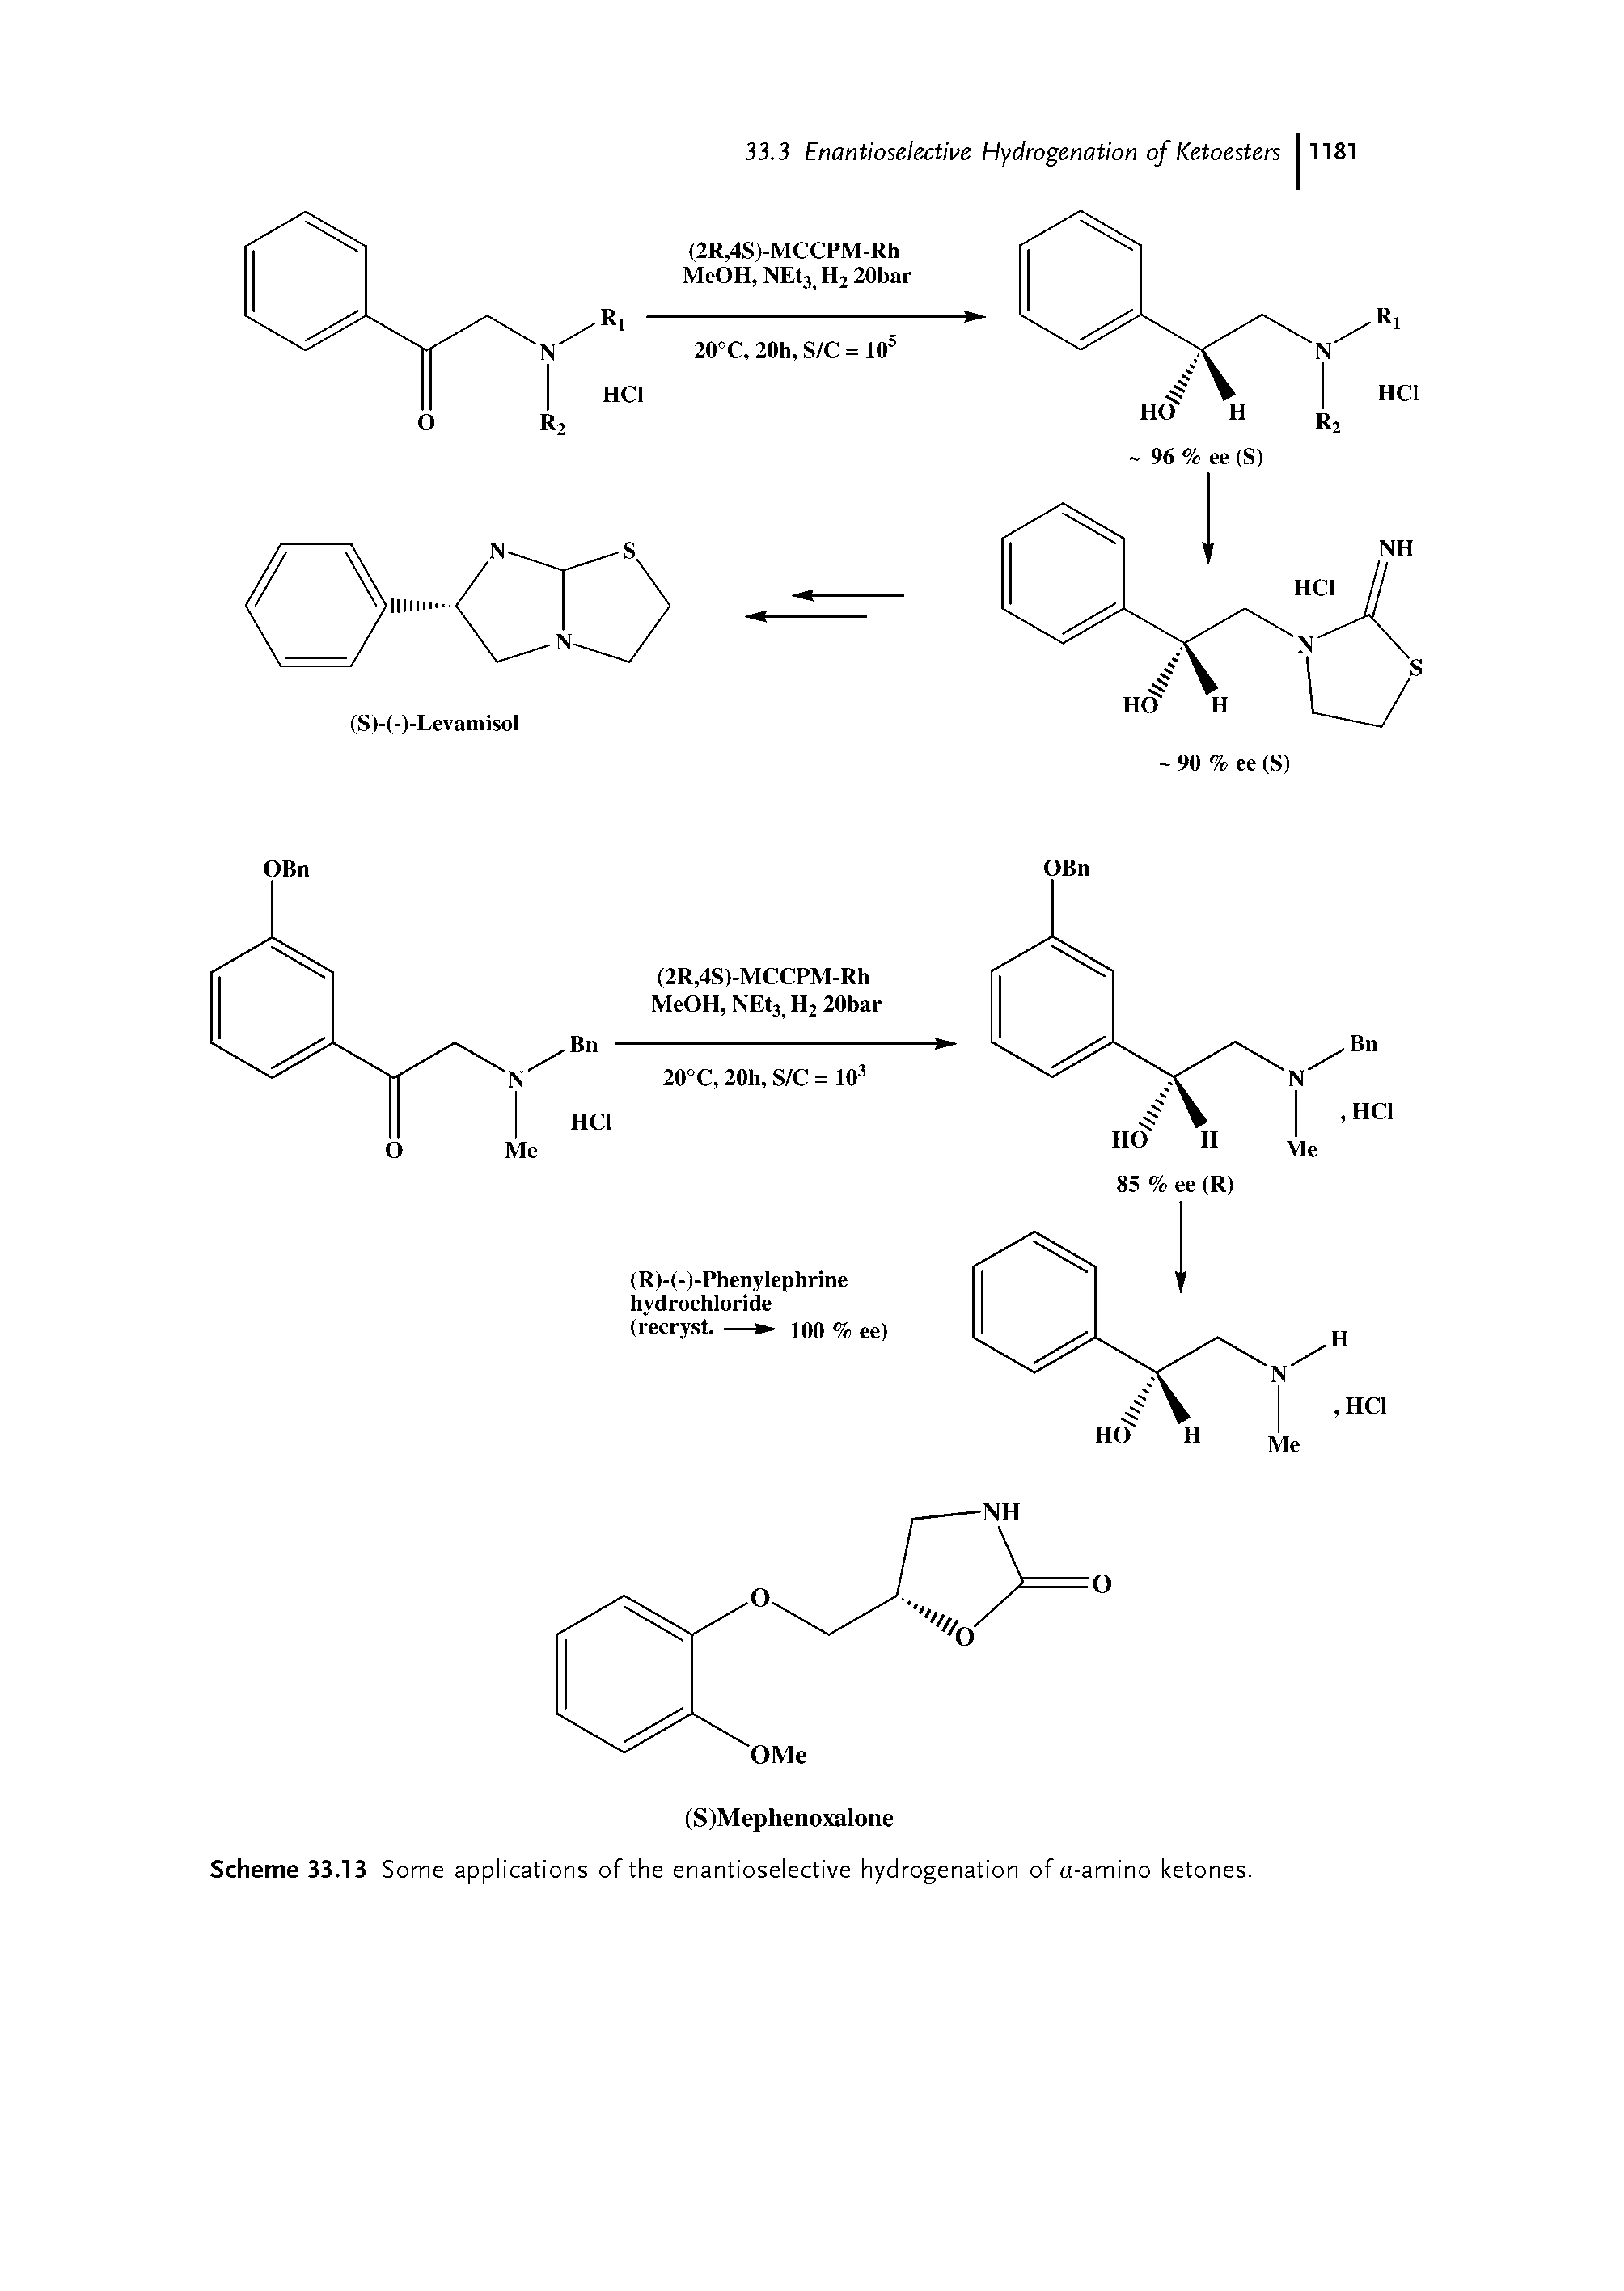 Scheme 33.13 Some applications of the enantioselective hydrogenation of a-amino ketones.